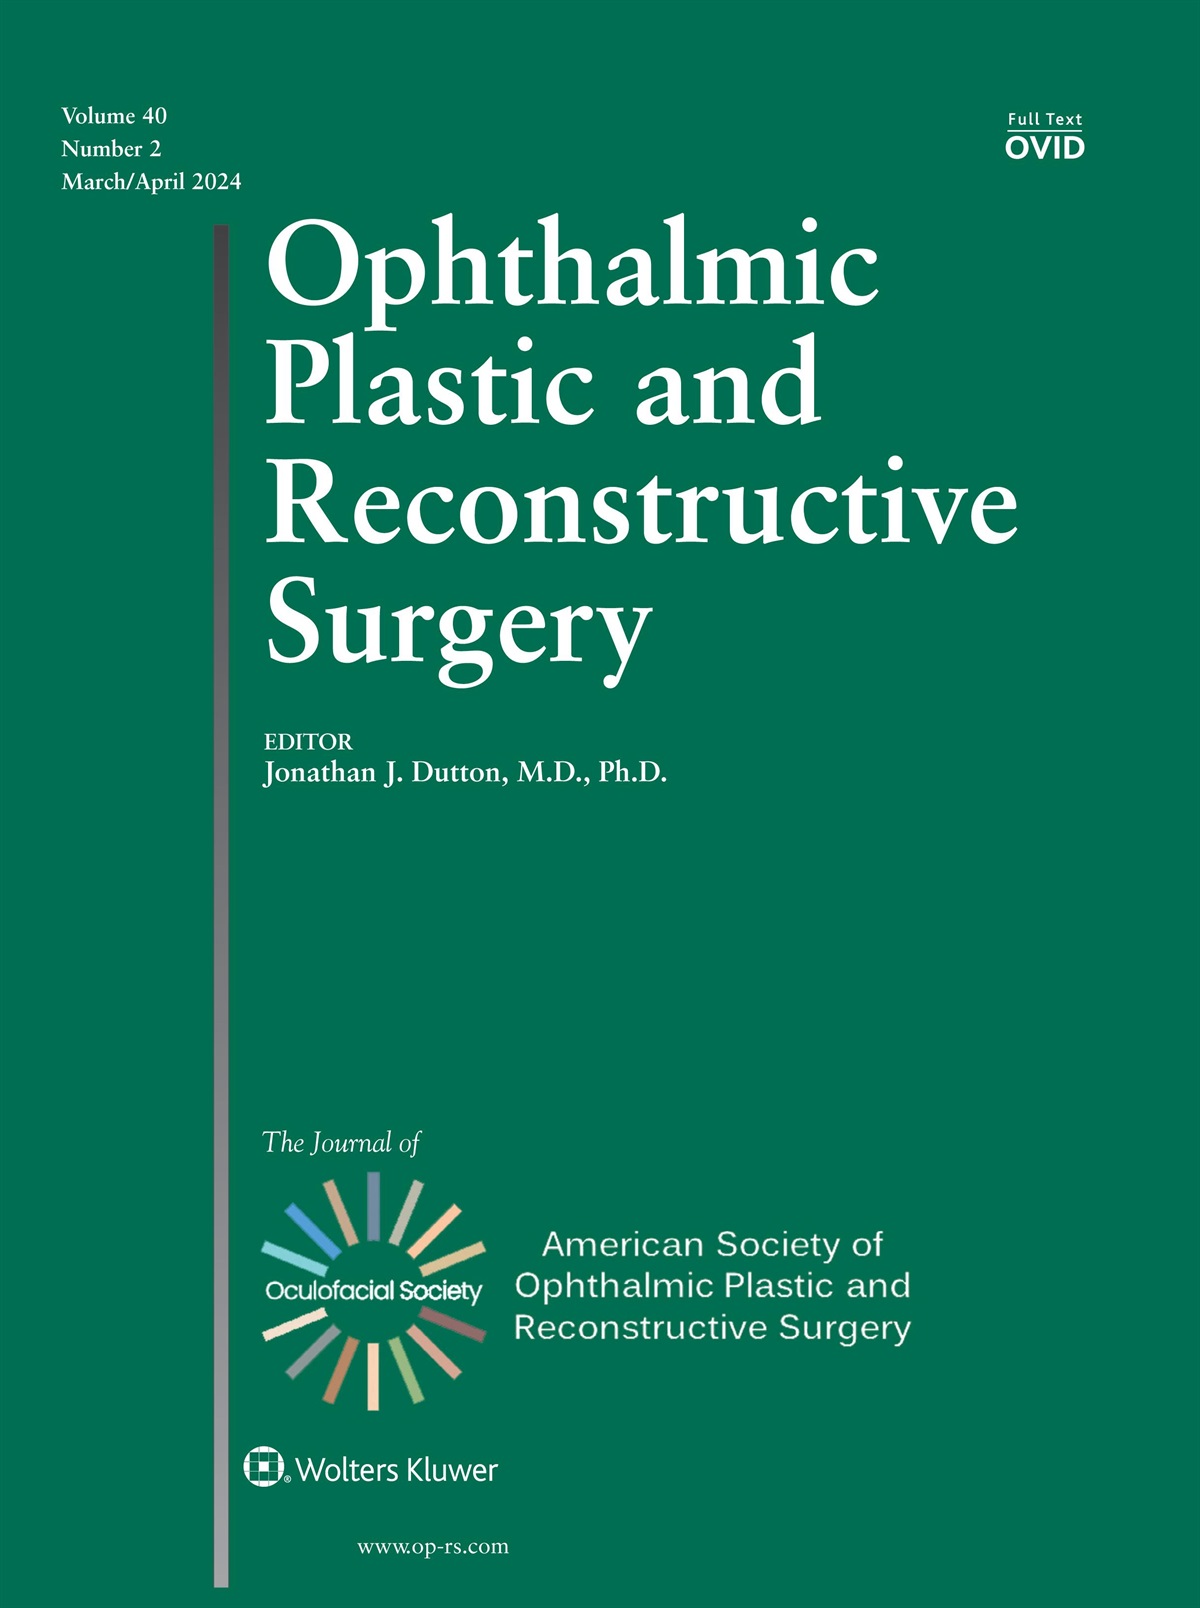 Reply Re: “Orbital and Oculofacial Diseases and Artificial Intelligence: Evaluating the Accuracy and Readability of ChatGPT”